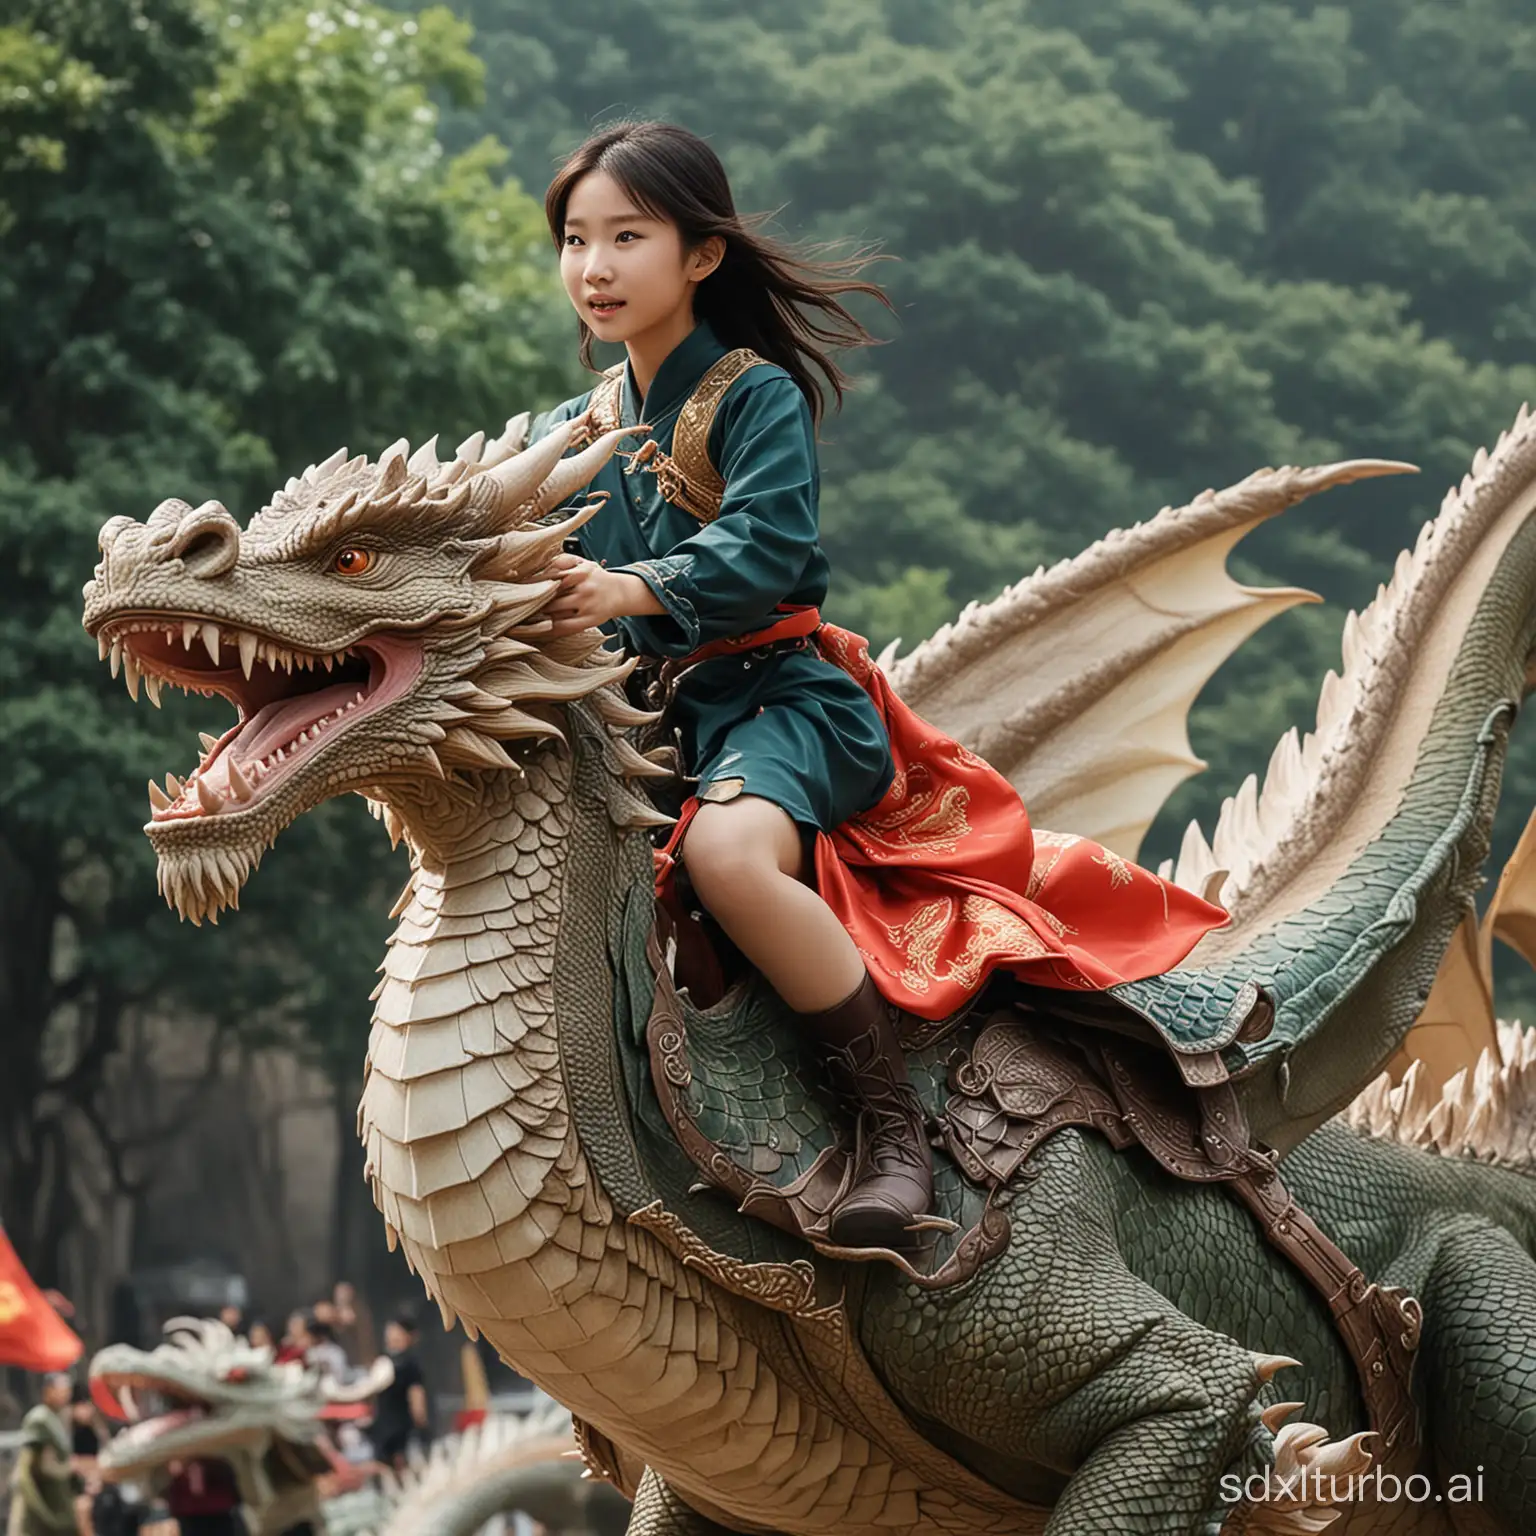 A Chinese girl wearing JK rides on a dragon.